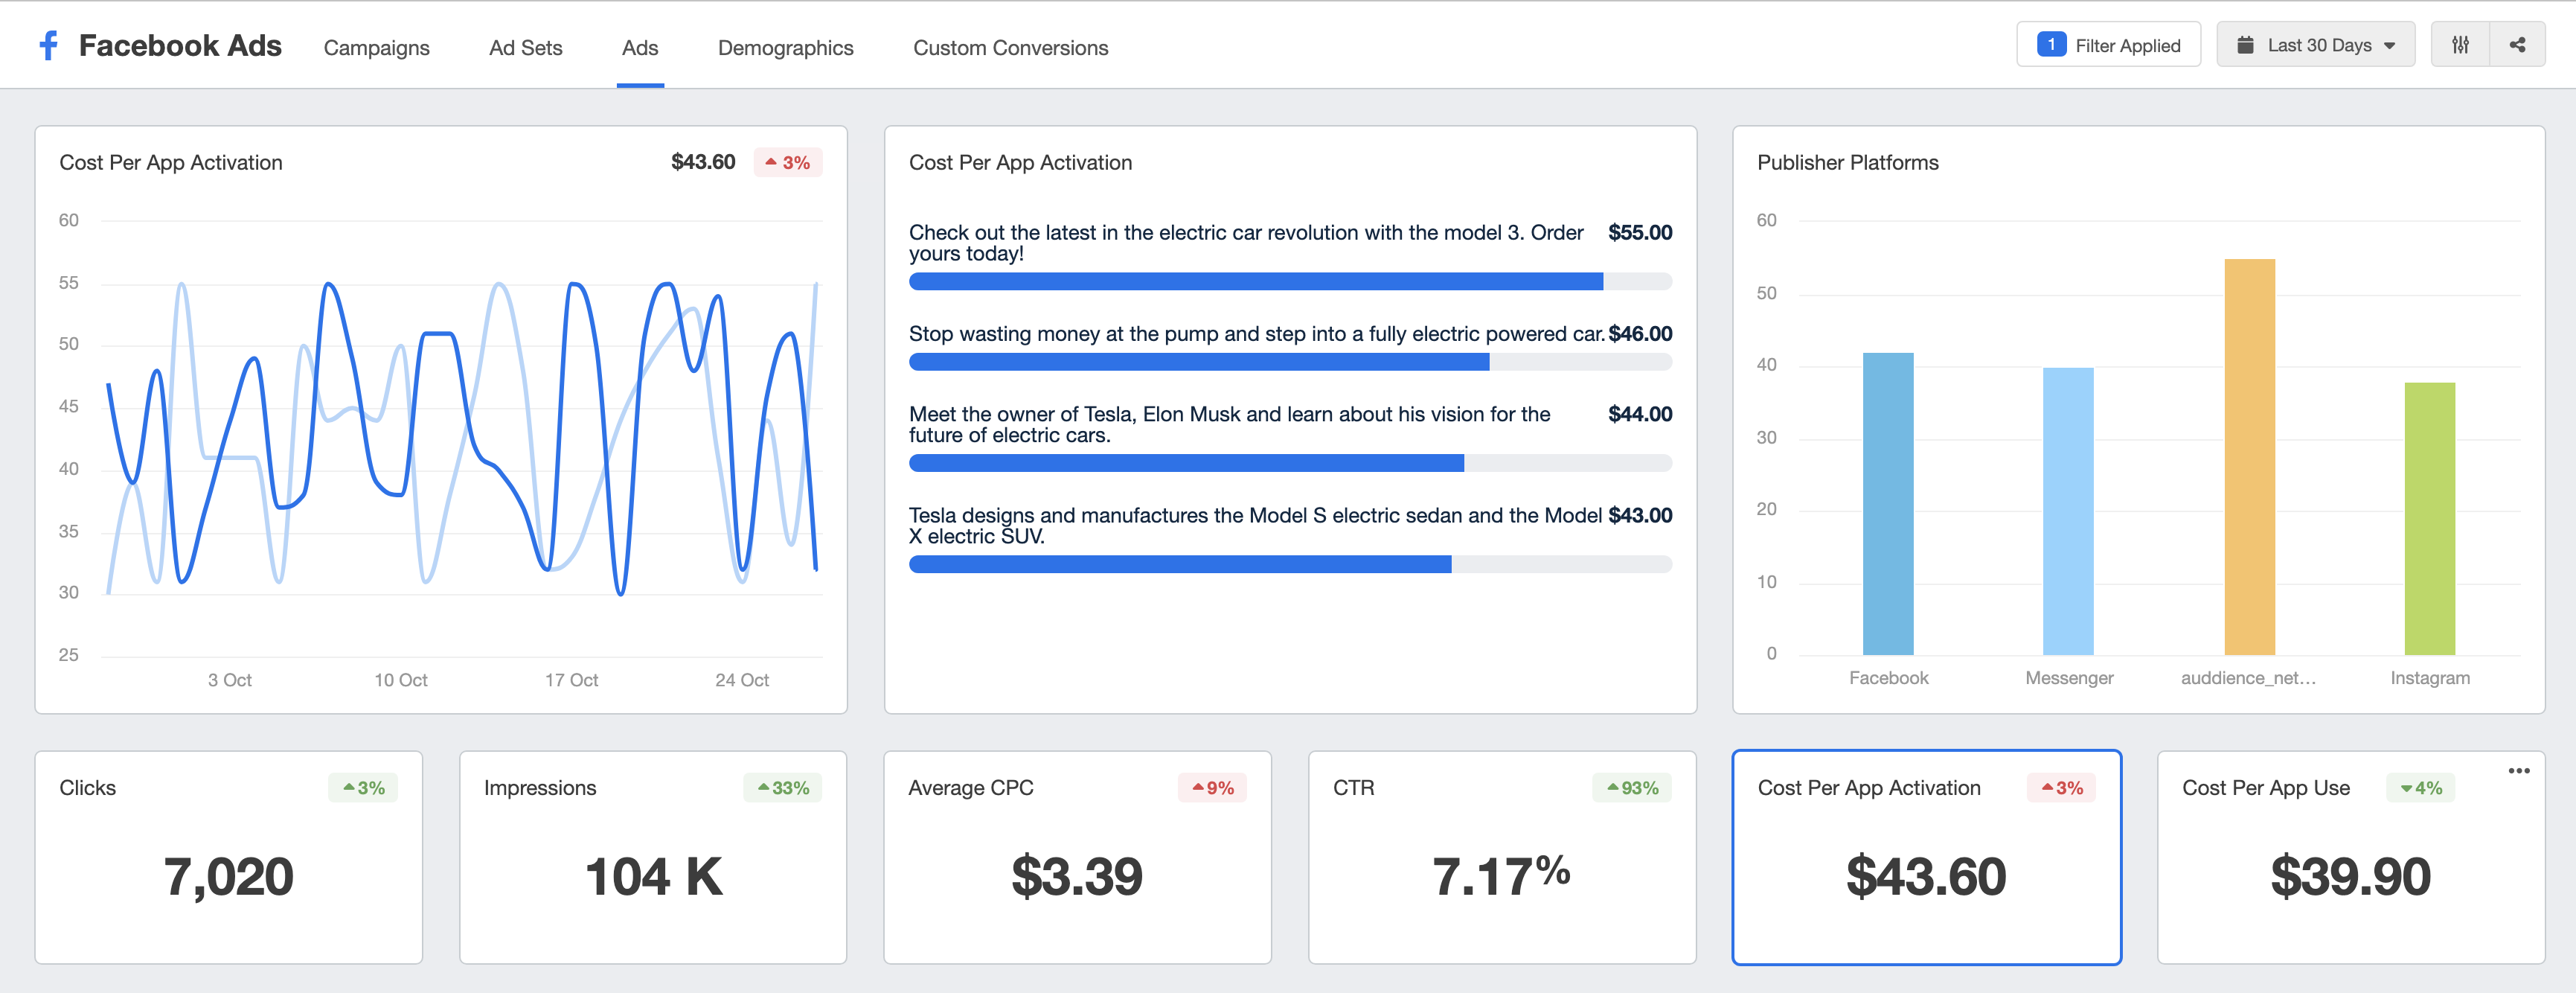 How to Accurately Track Your Facebook Ad Metrics in 2022 : Social